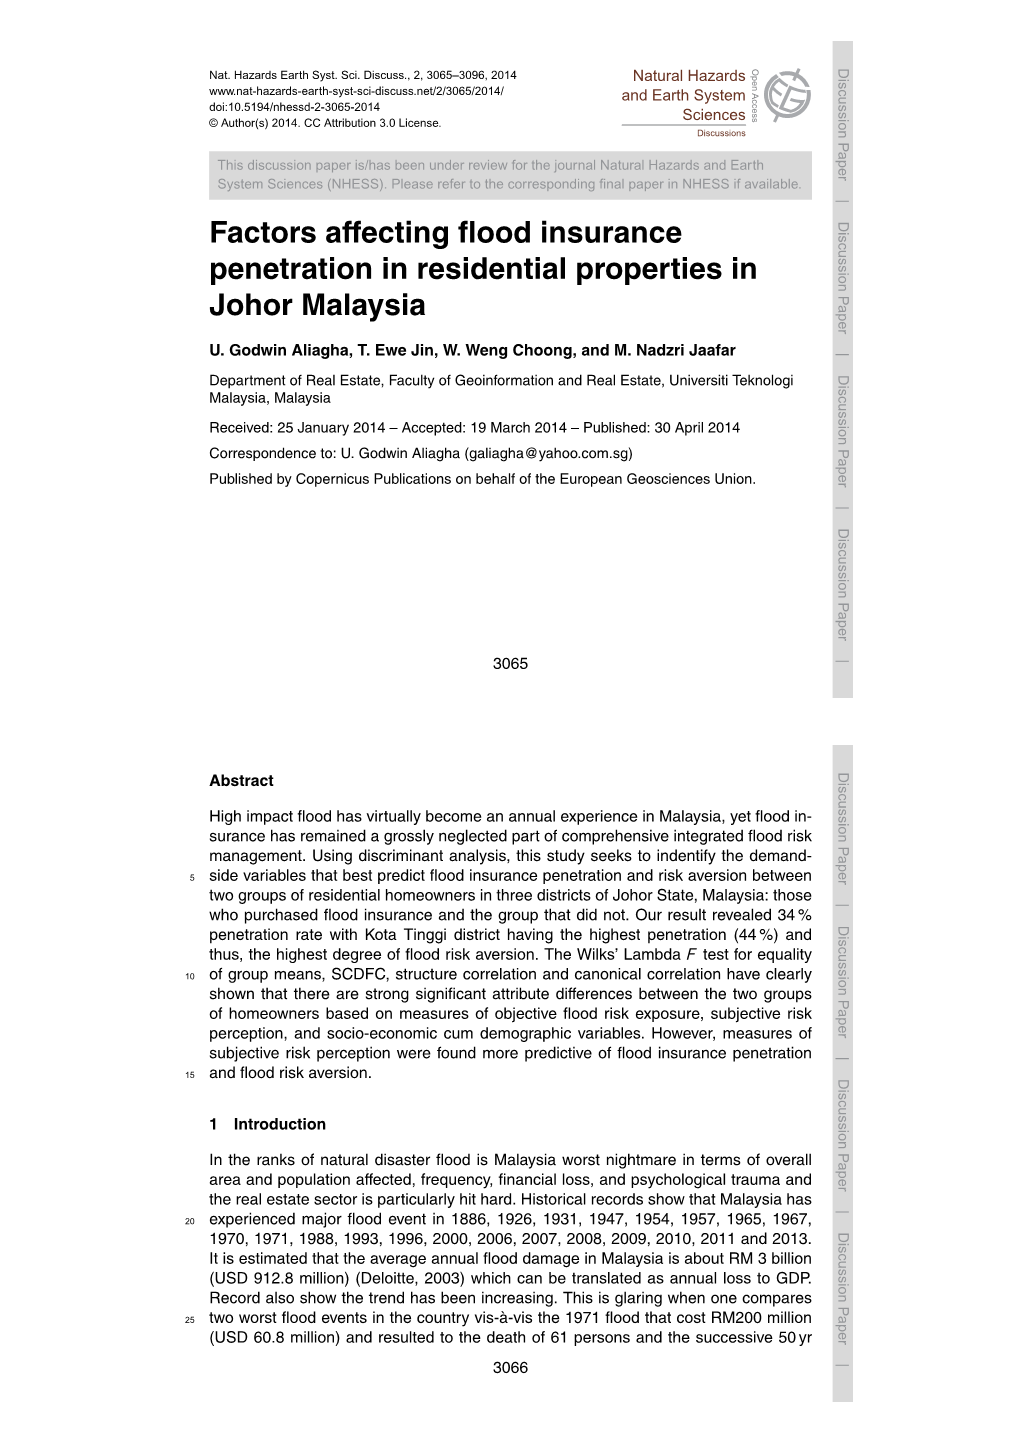 Factors Affecting Flood Insurance Penetration in Residential Properties